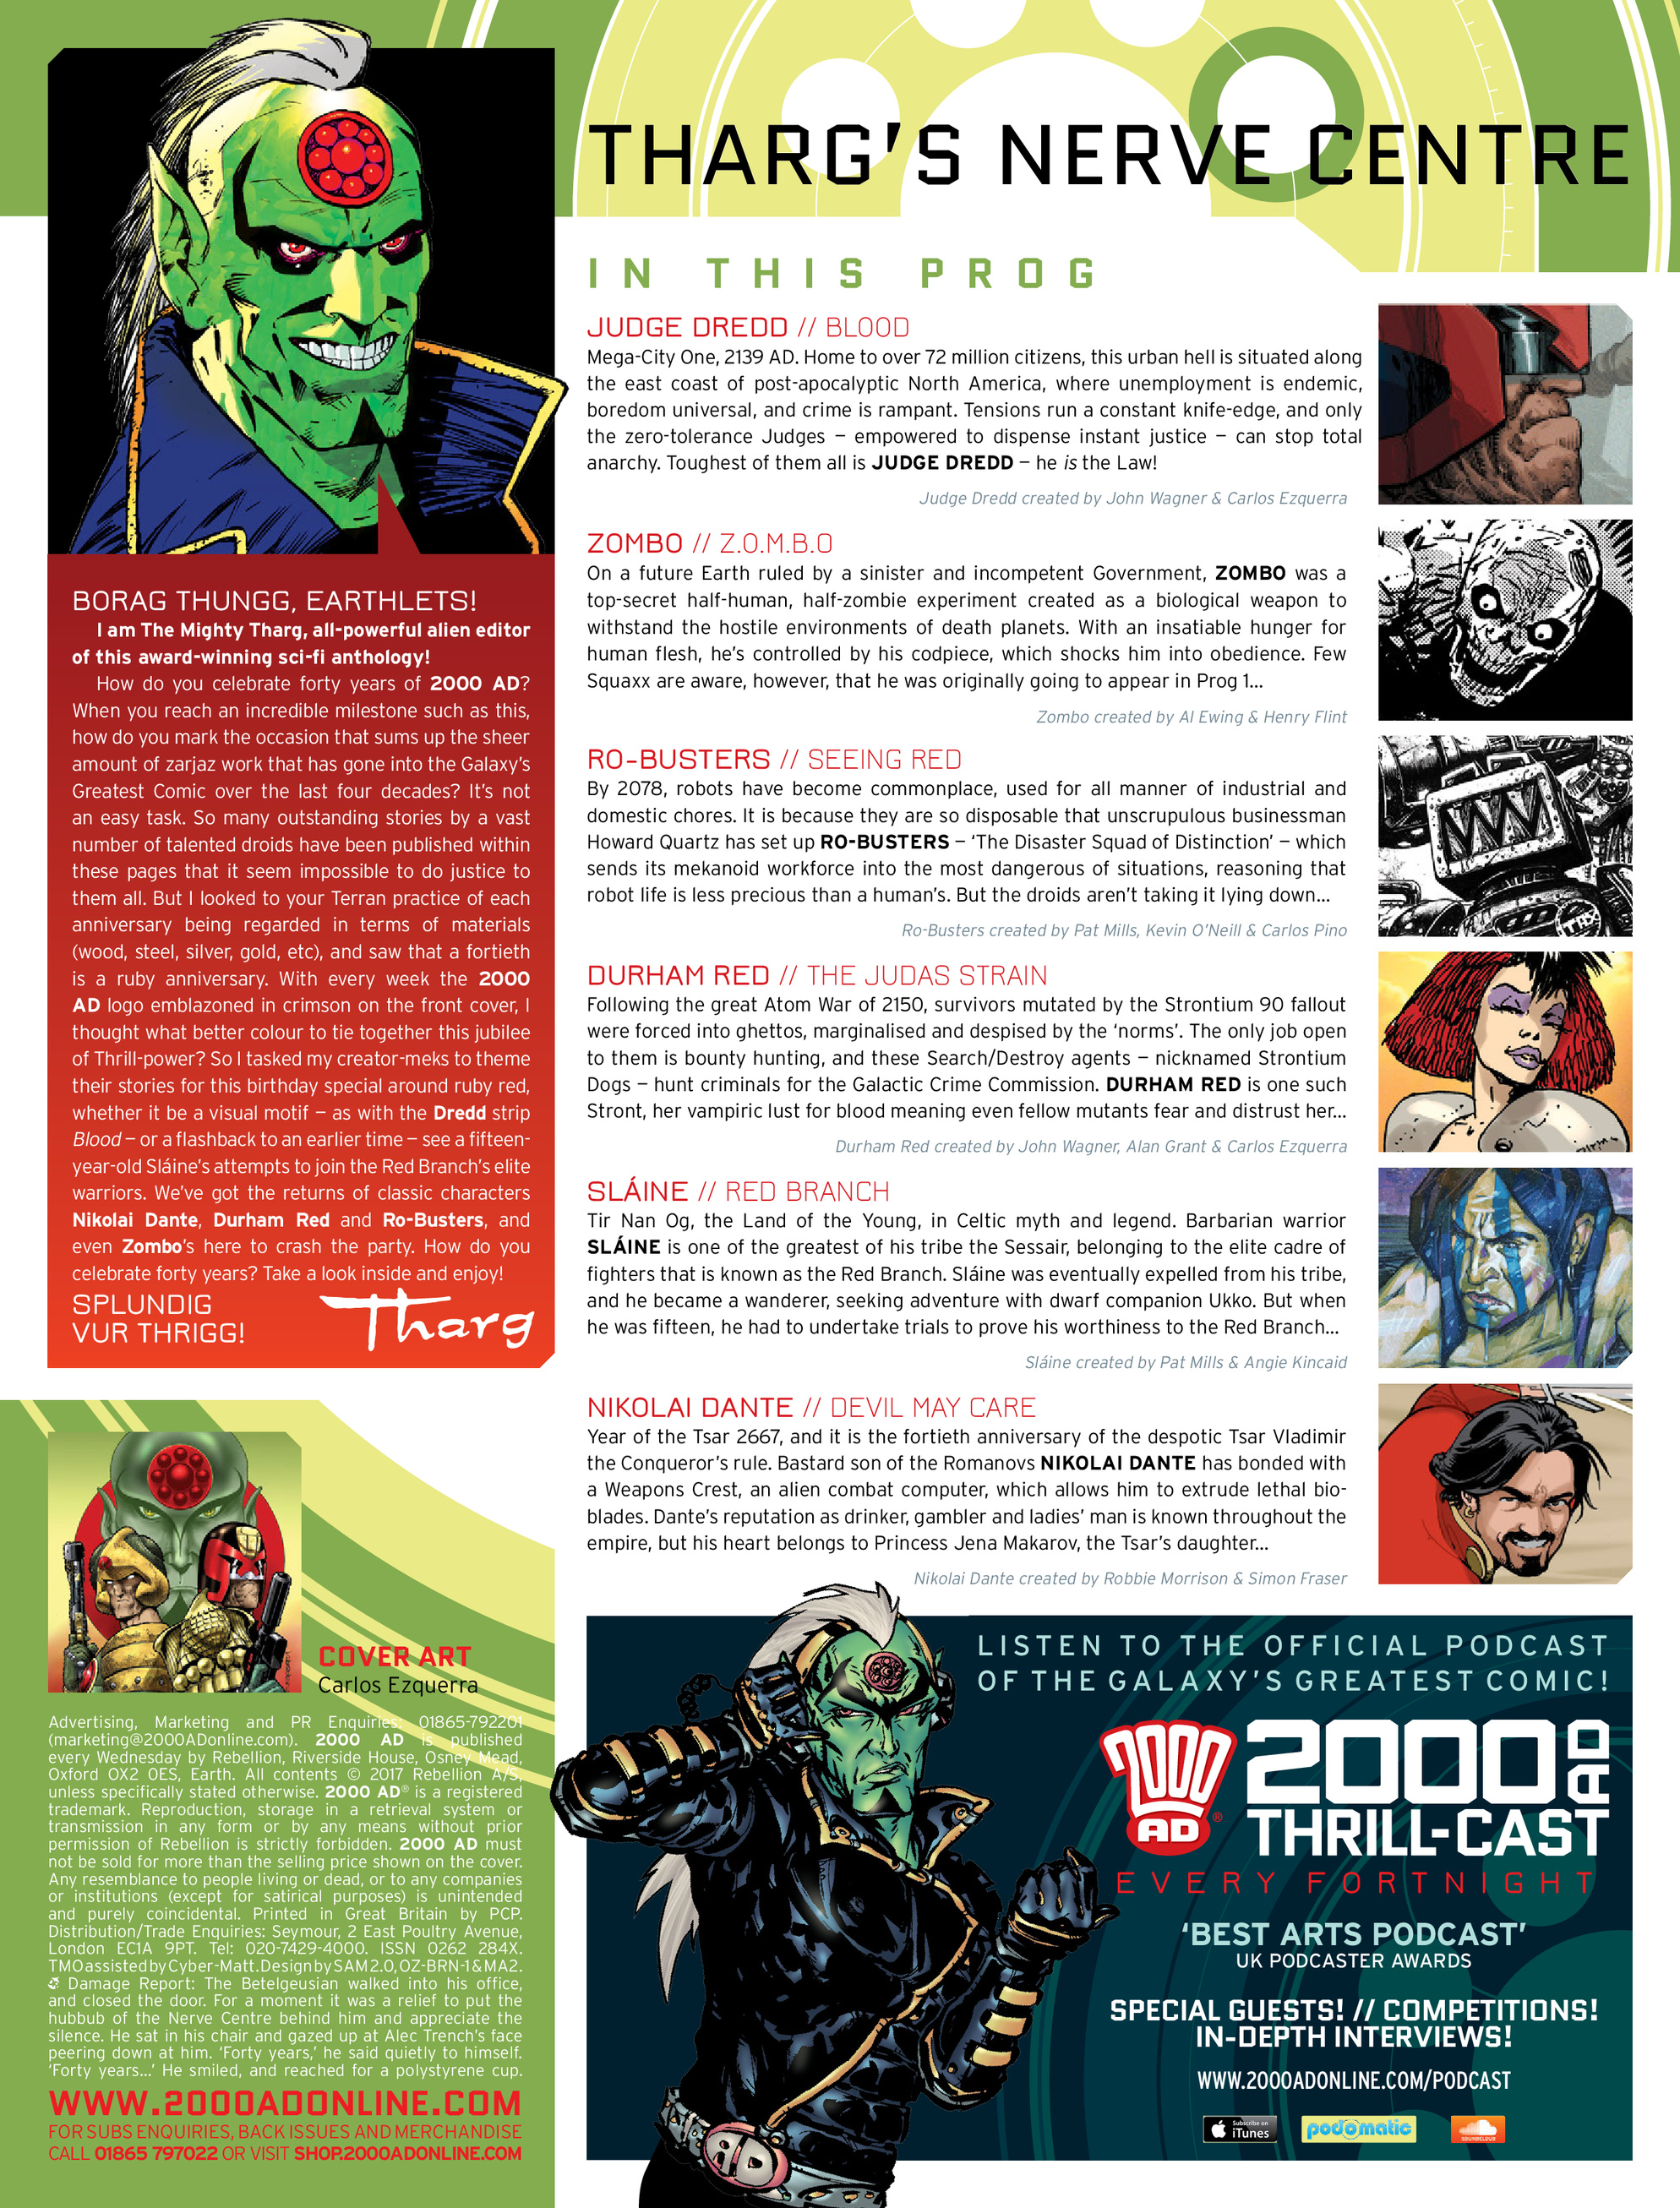 Read online 2000 AD comic -  Issue #2000 AD _40th Anniversary Special 2017 - 4